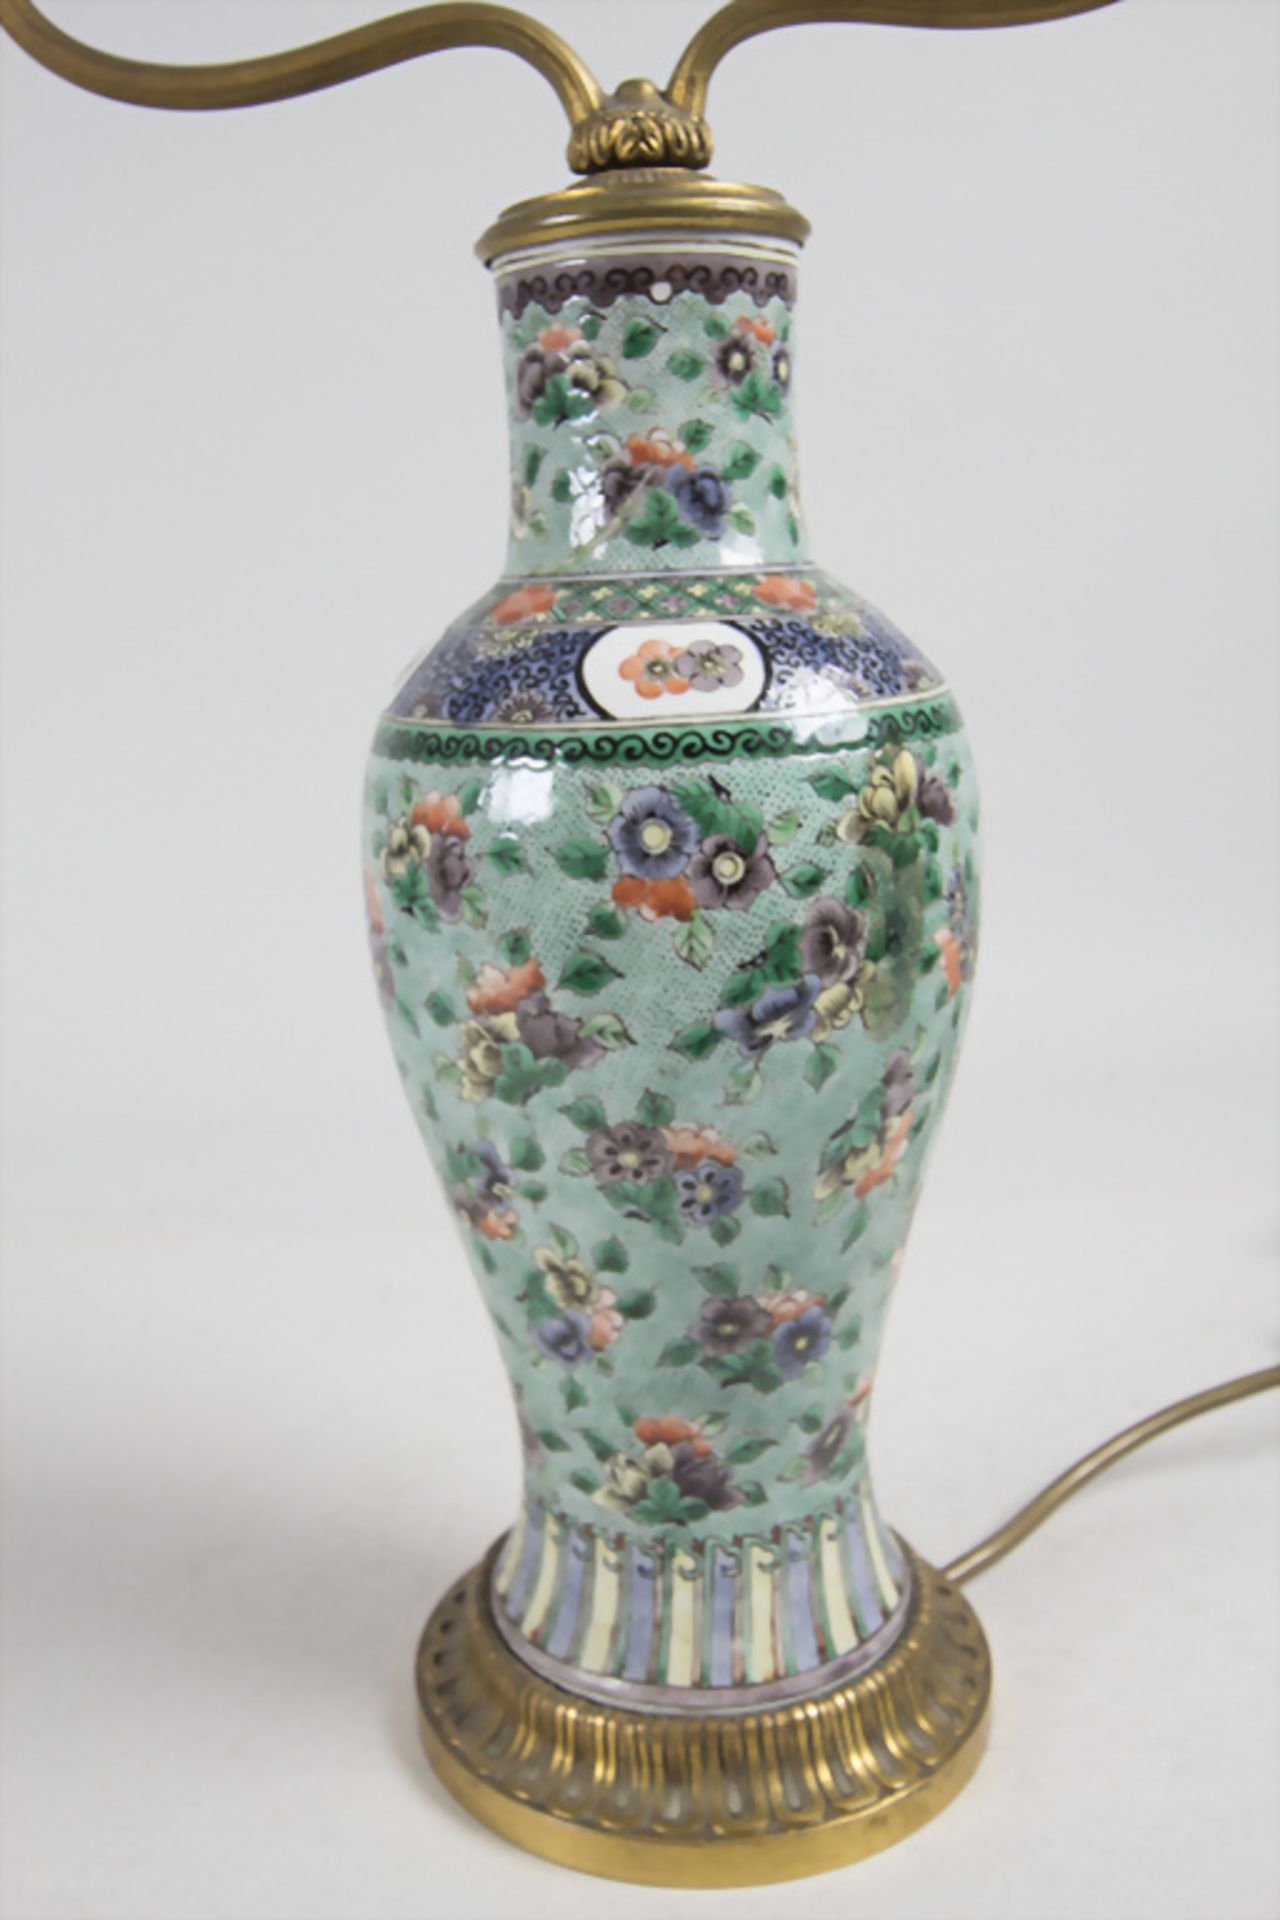 Tischlampe / A table lamp, Frankreich bzw. China, um 1900, Vase 18./19. Jh. - Image 2 of 6